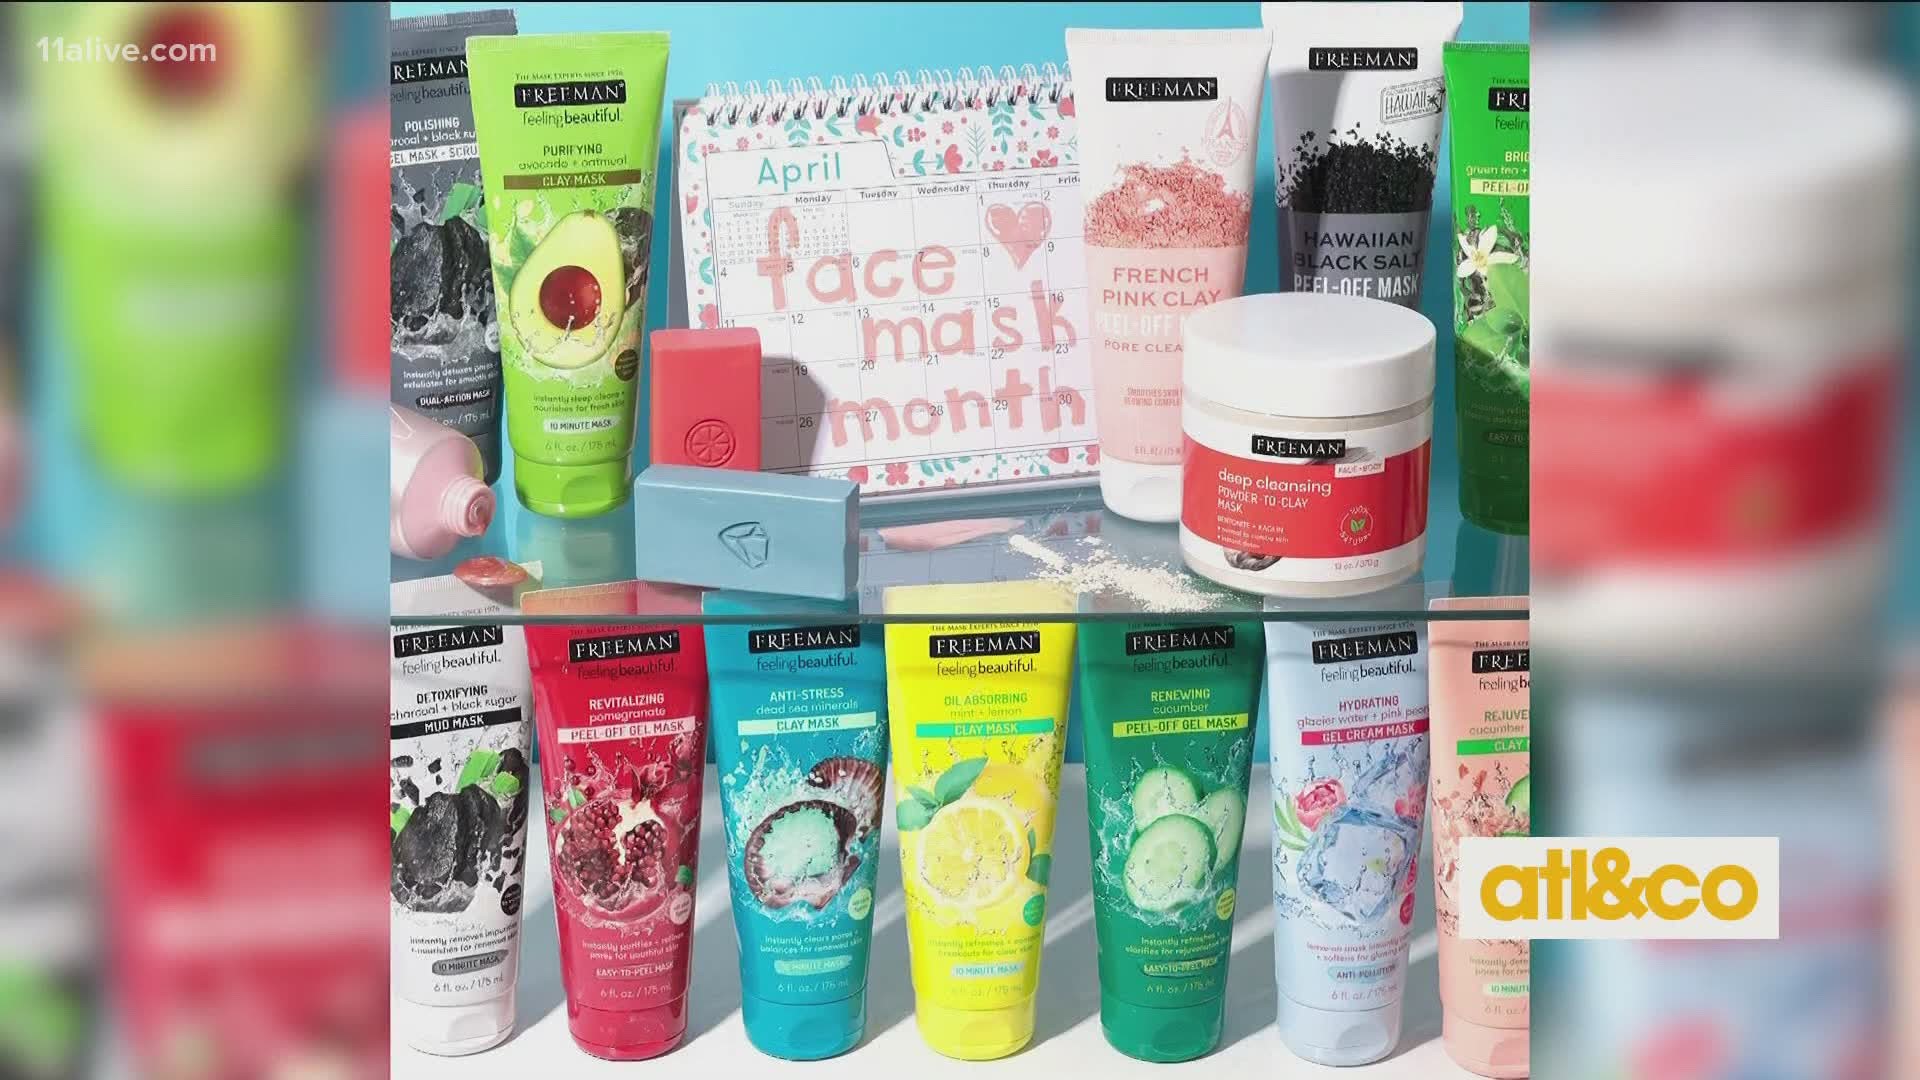 Freeman Beauty is celebrating National Face Mask Month by donating over a million of their masks to frontline healthcare workers.